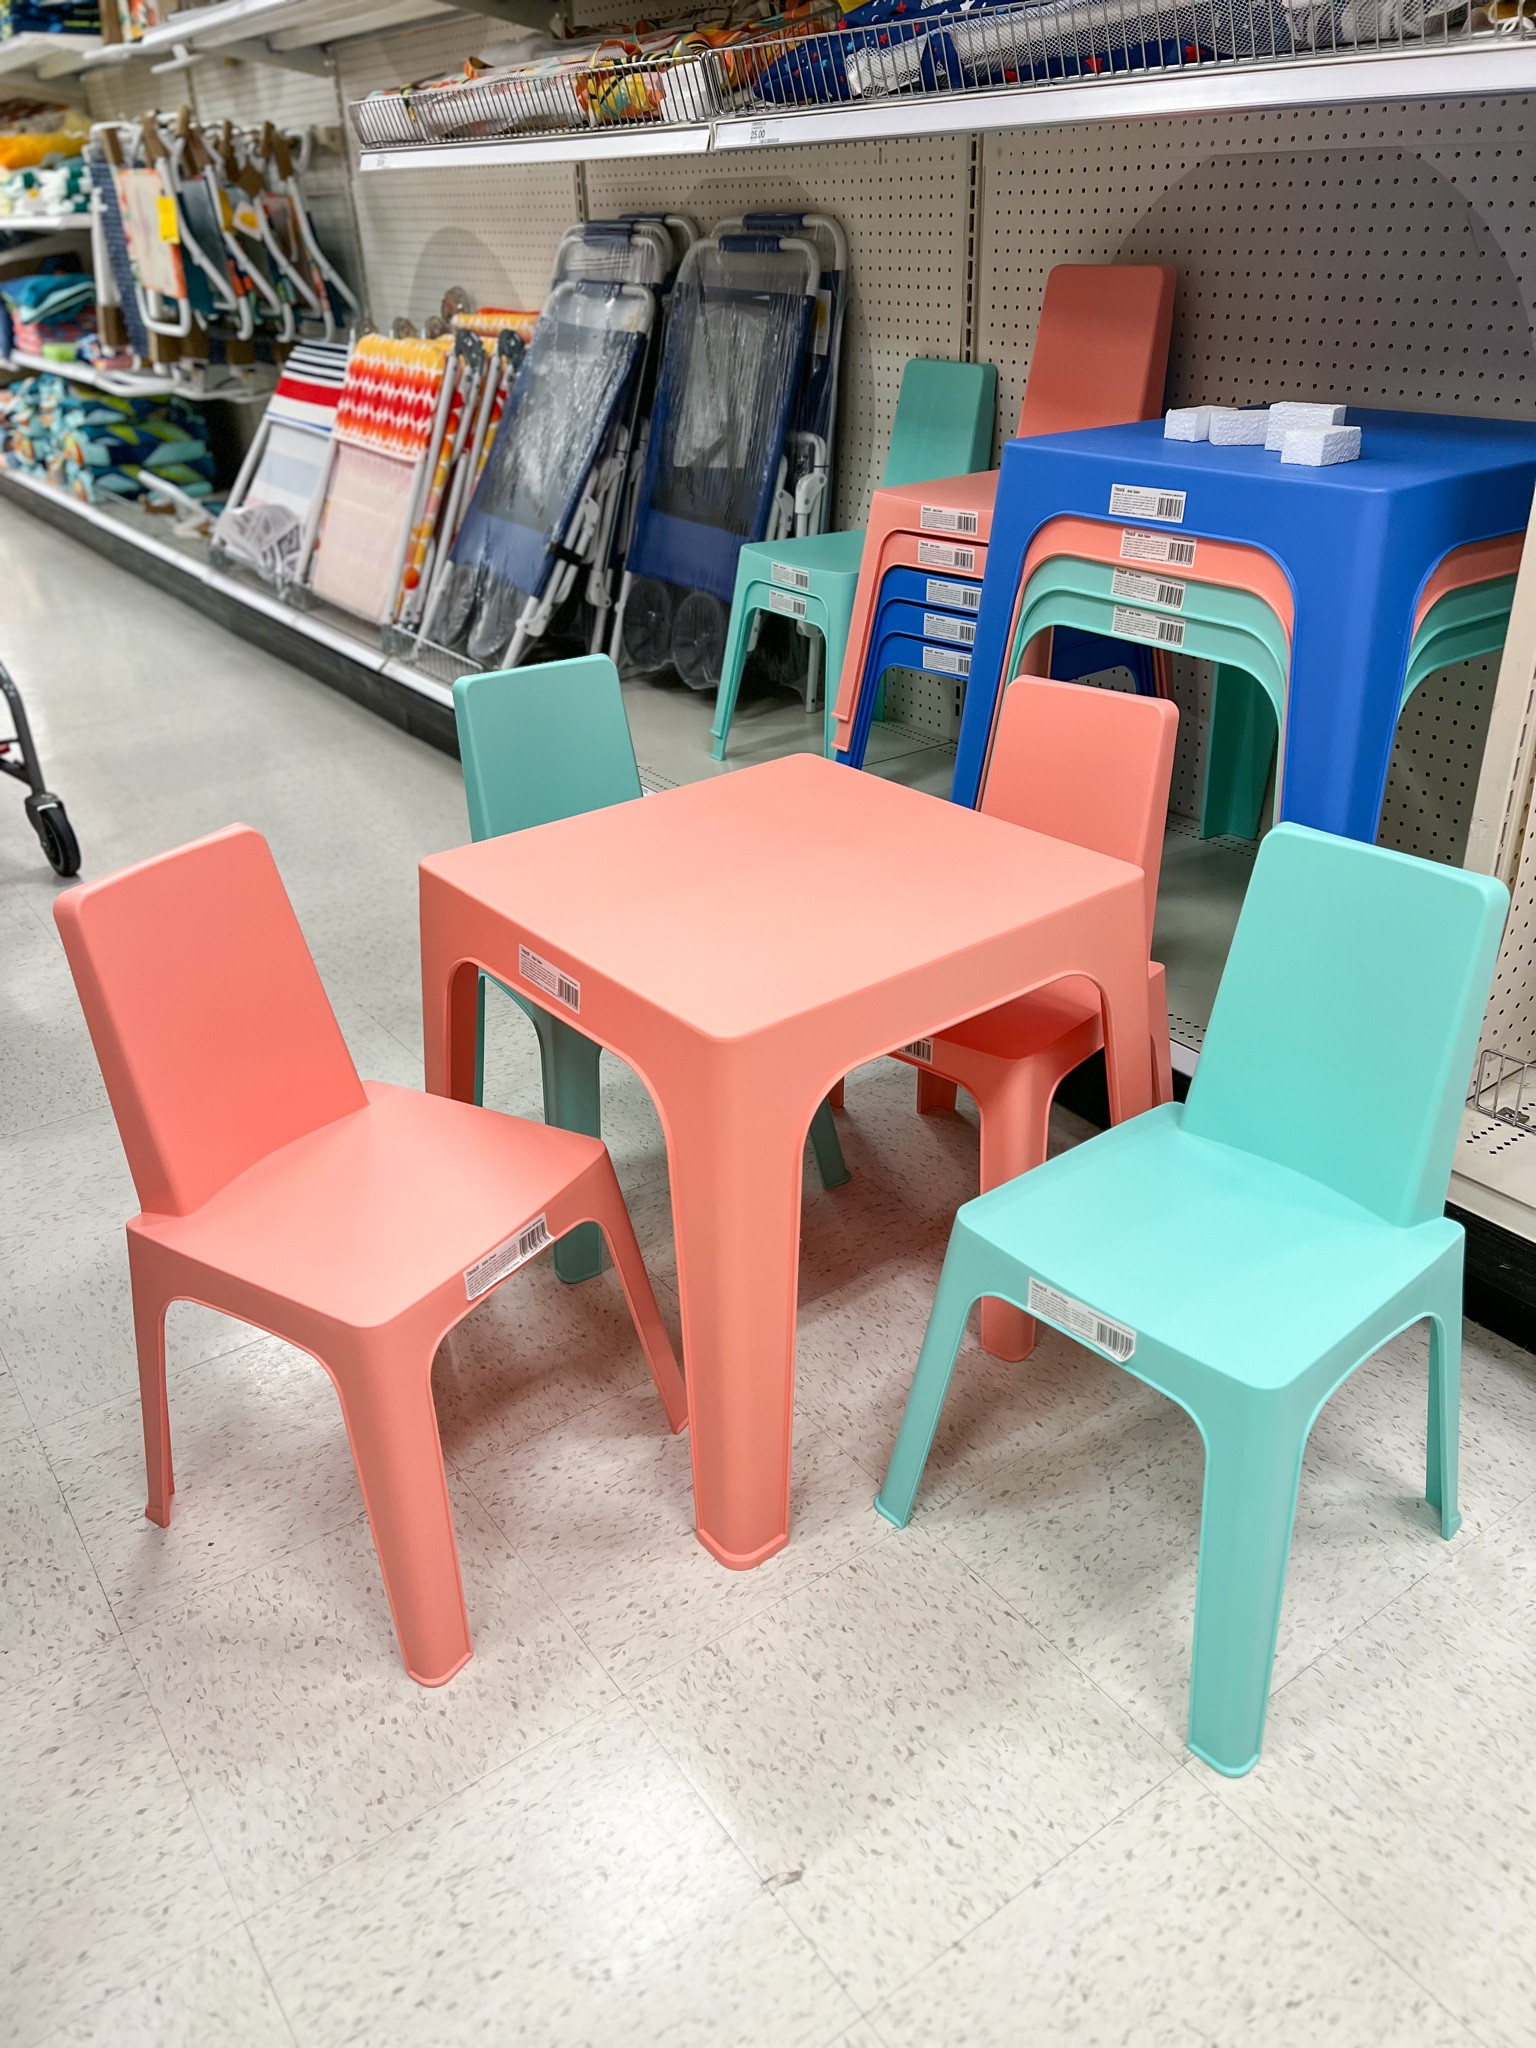 Small Kids Tables : Target